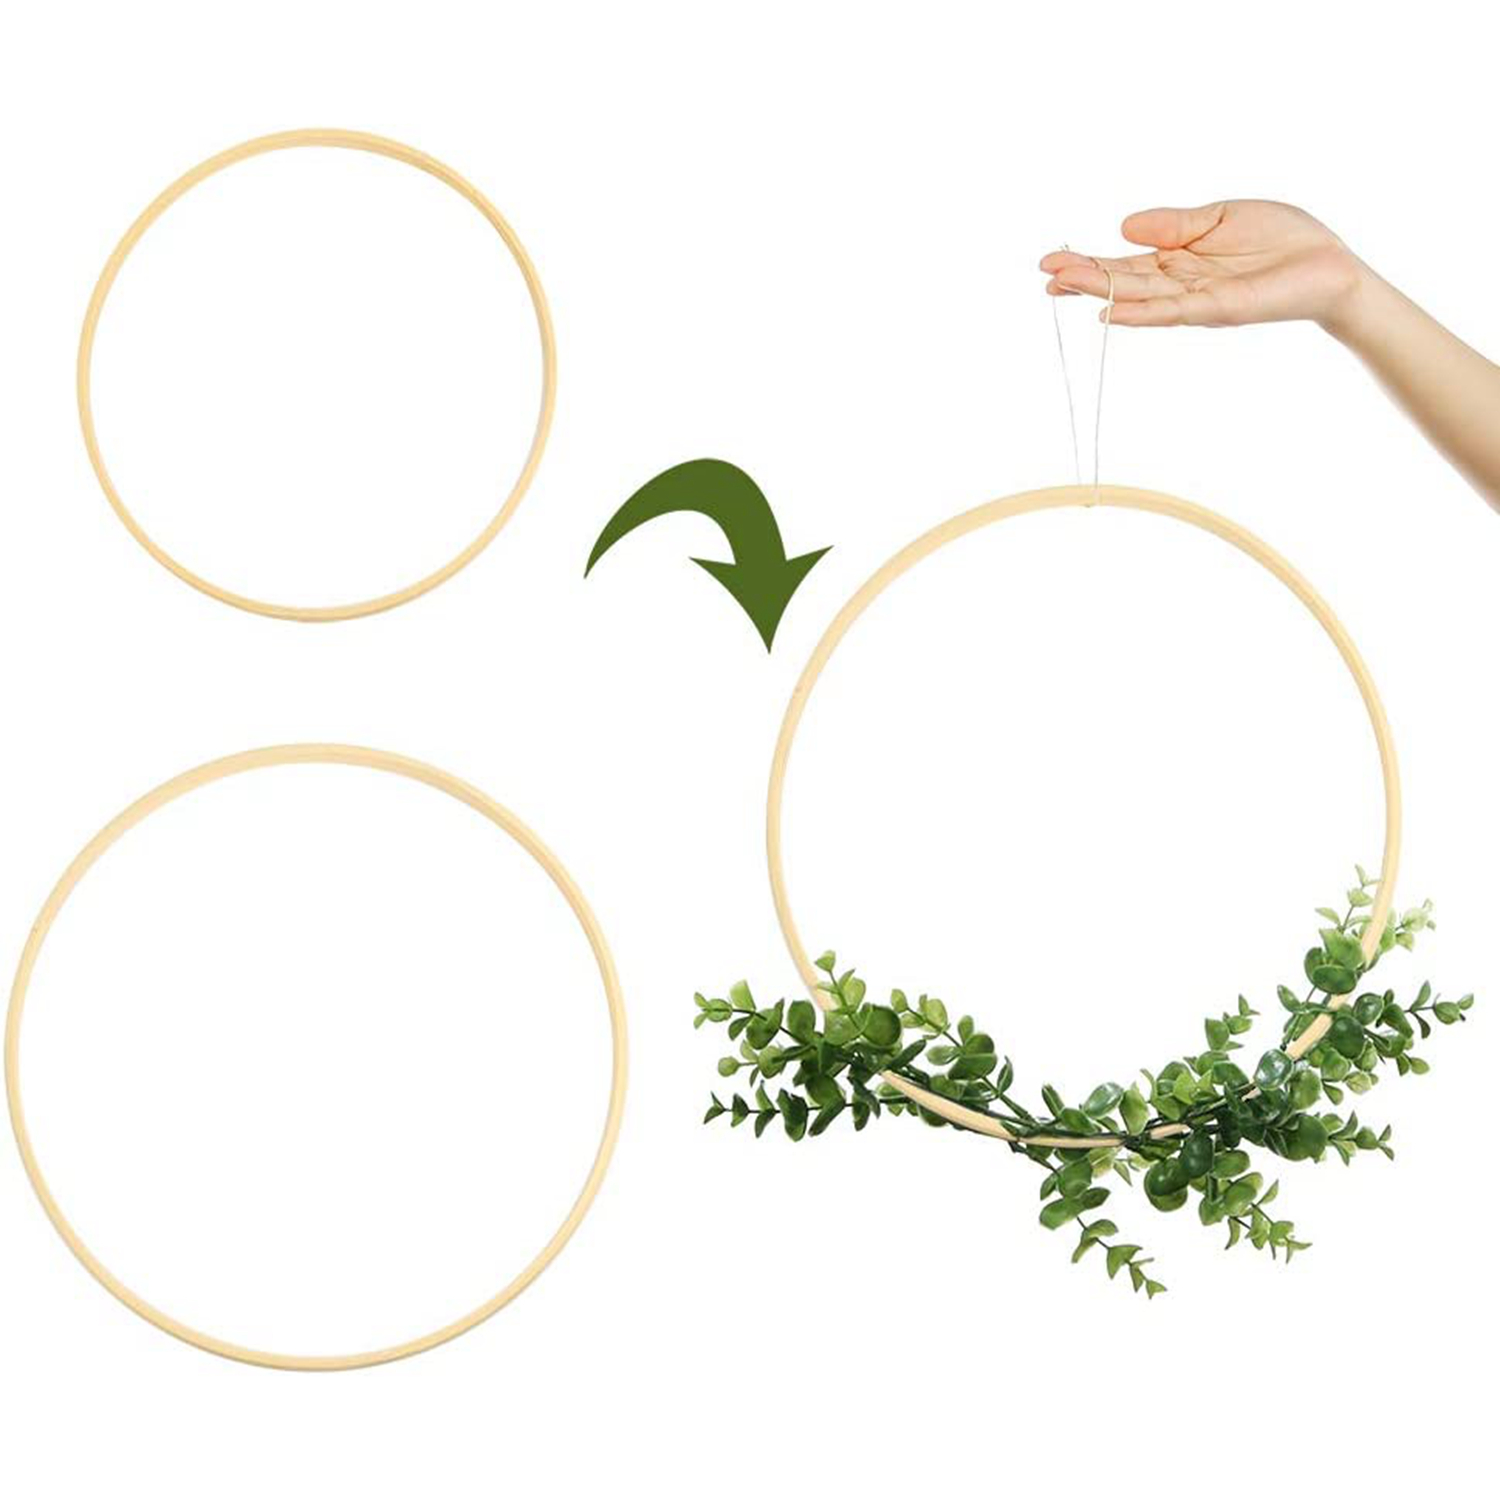 Set Of 5 - Natural Wooden Rings For Crafts, Floral Hoop Wreath Wall Hanging  Decor